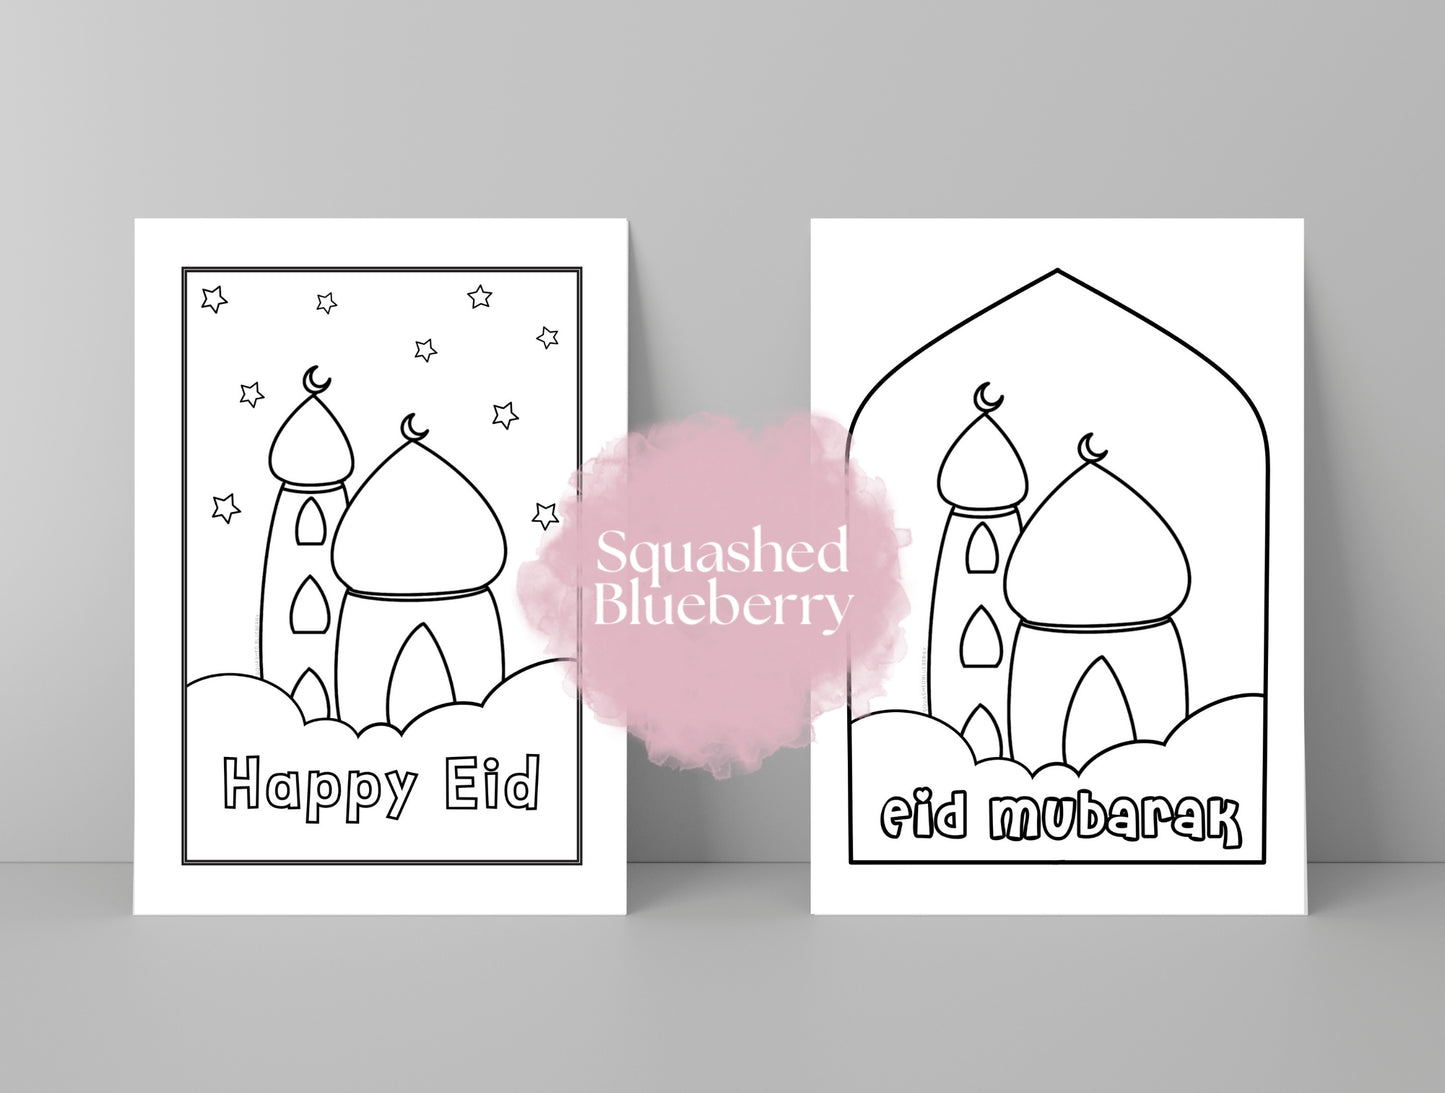 Eid Colouring Cards x 2 • Instant Digital PDF Download